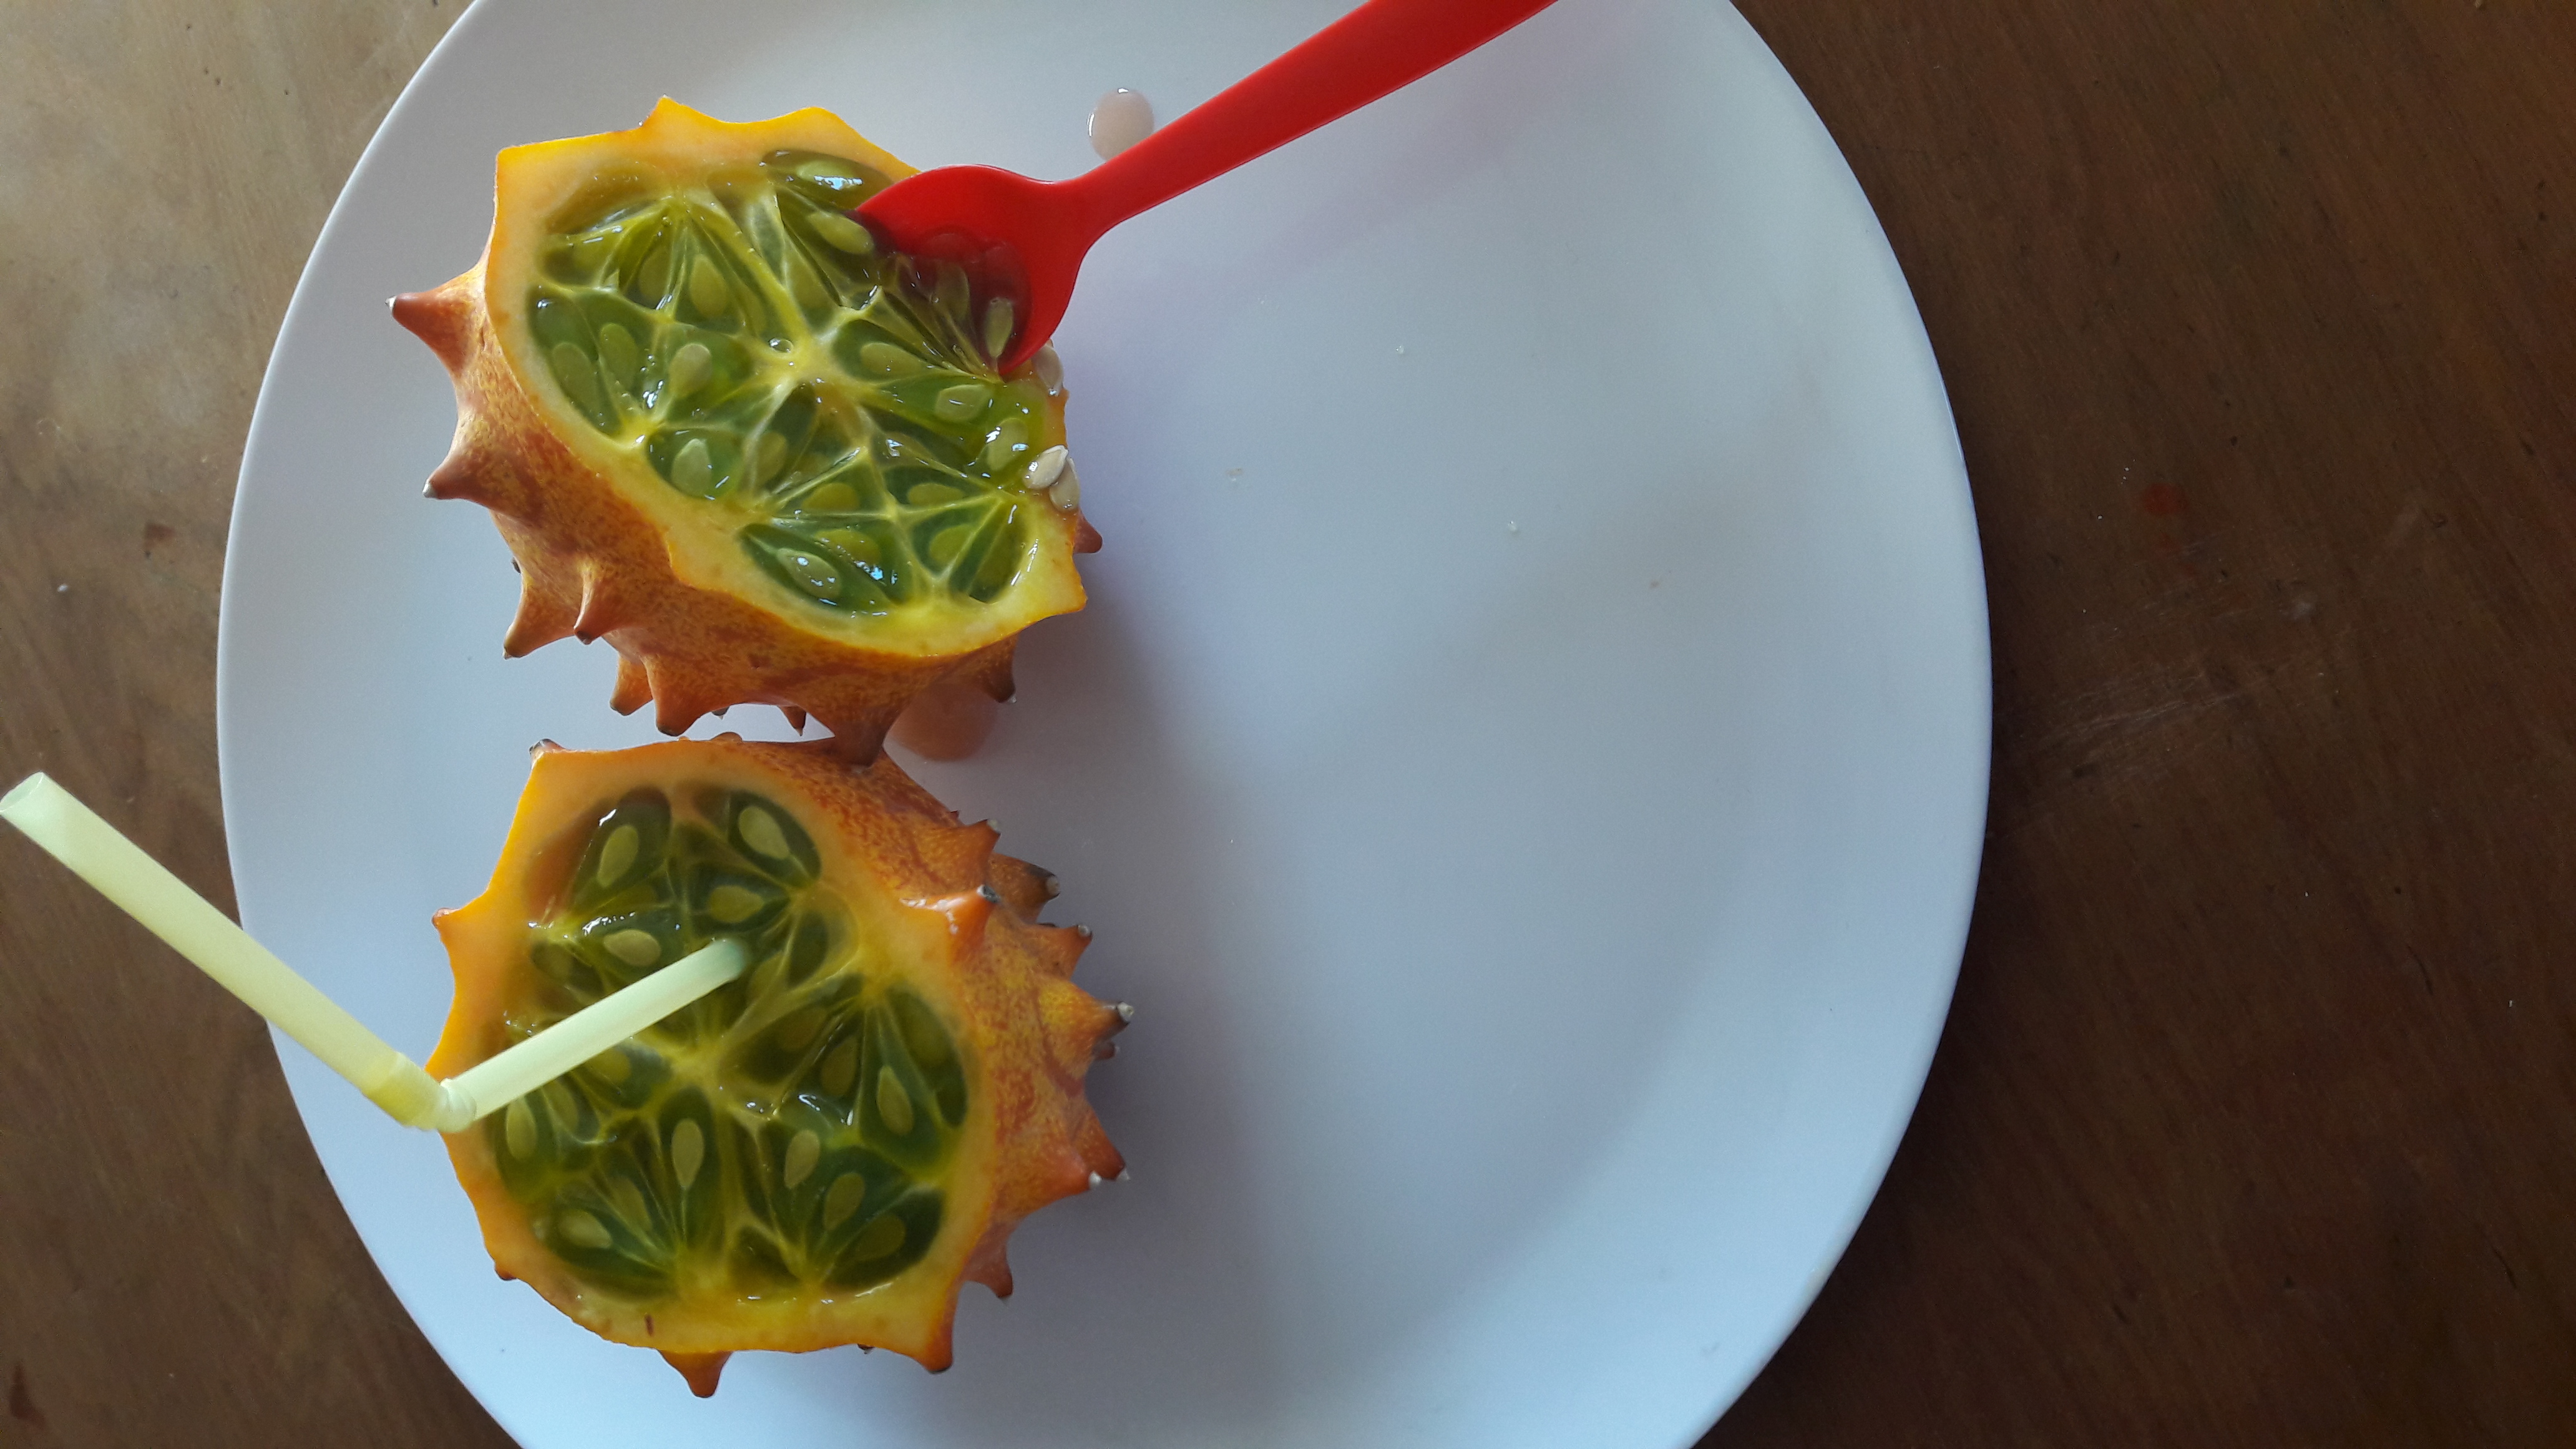 kiwano cut in half with a straw and spoon